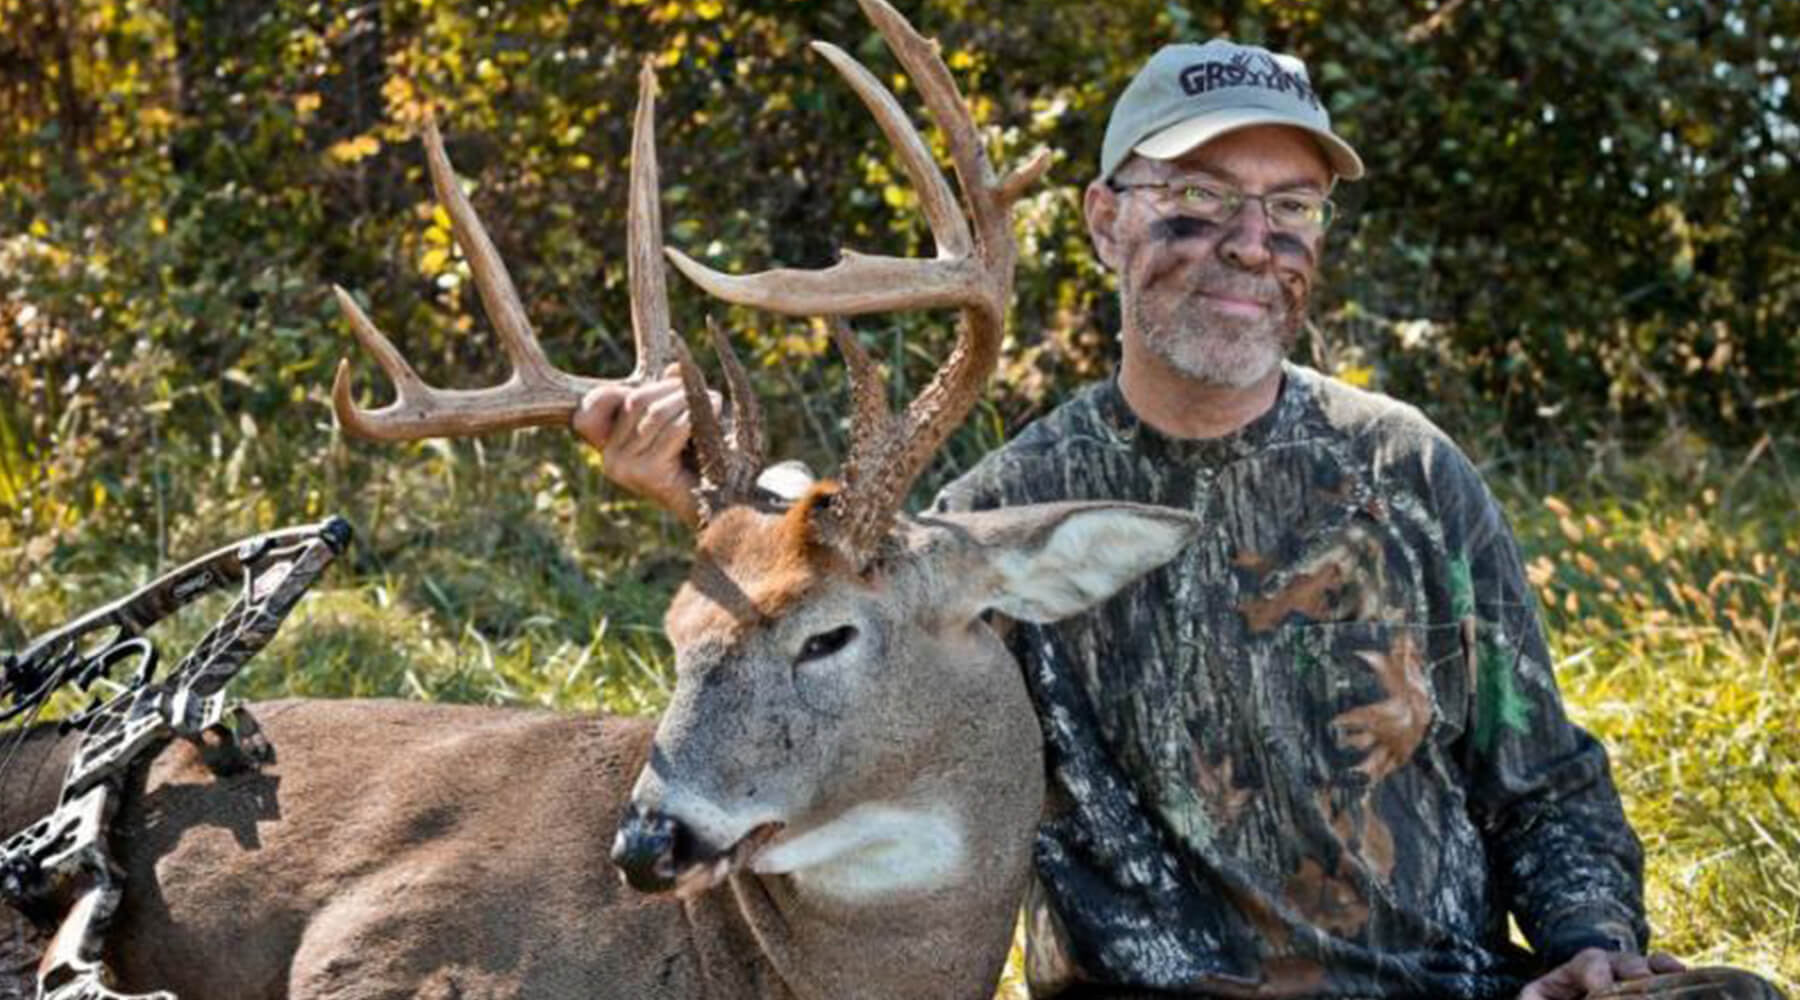 Scouting Whitetails: How Locating Small Game Leads to Harvesting Bucks